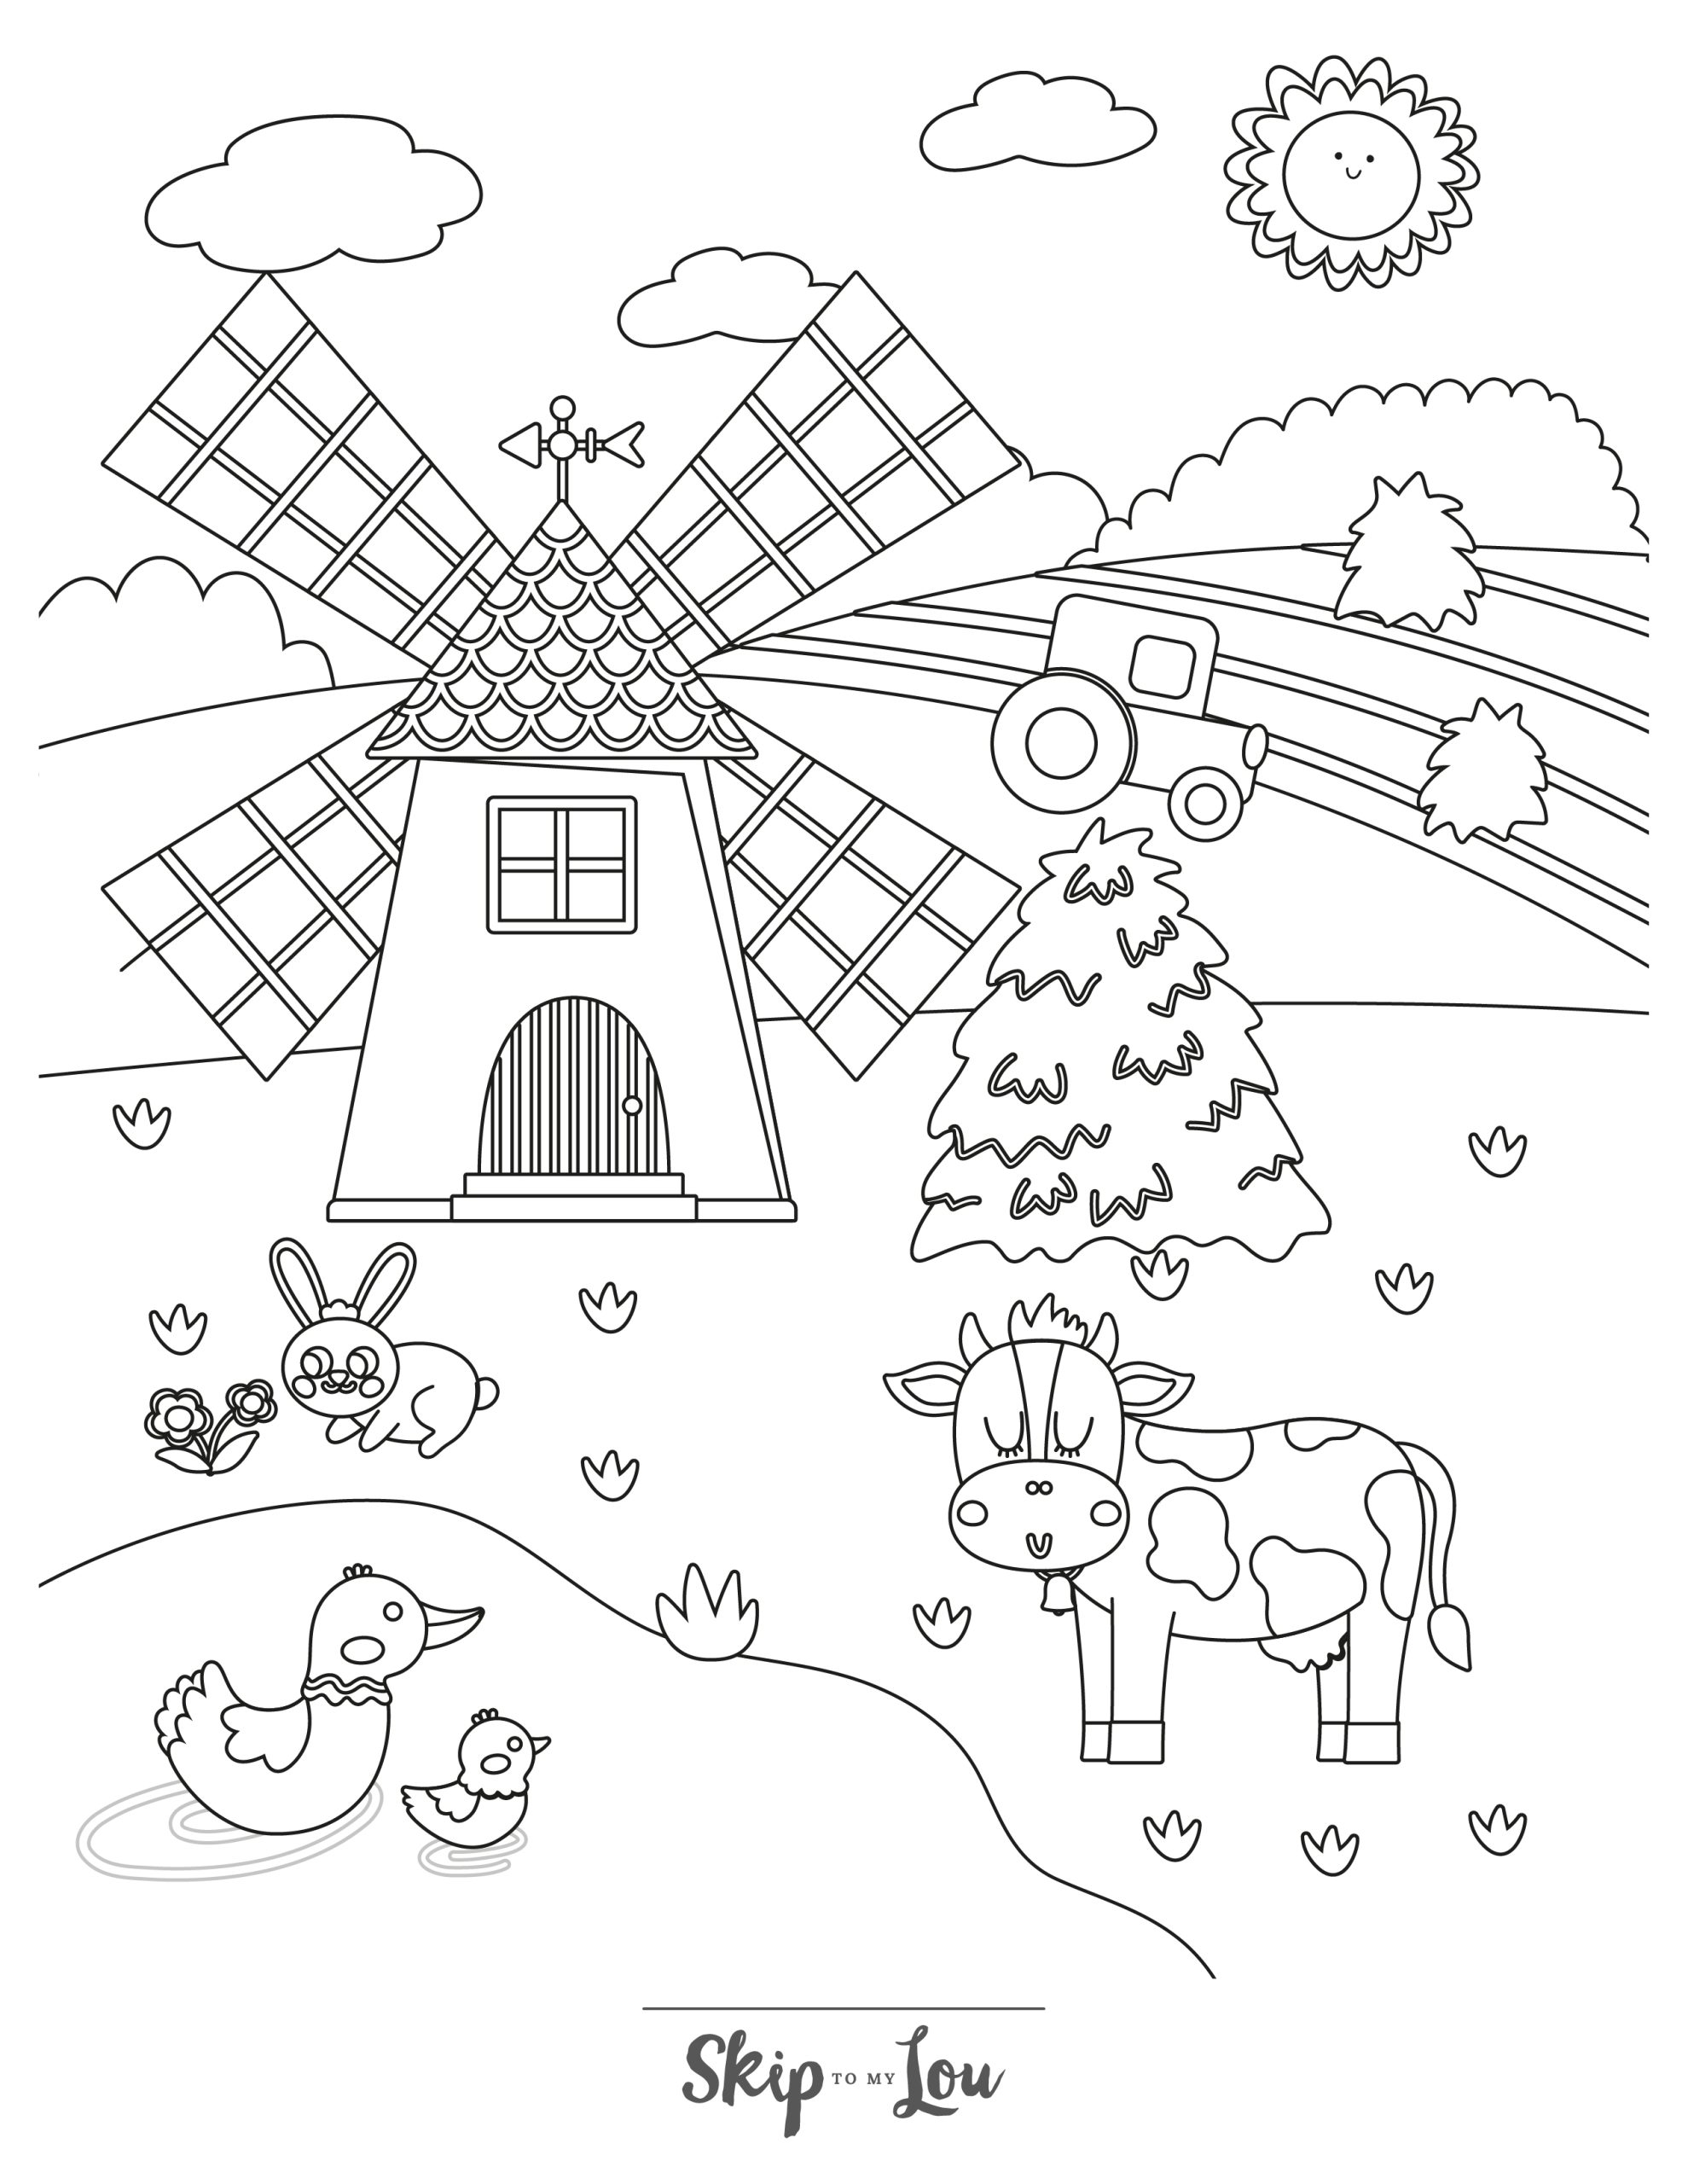 Skip to my Lou - Farm Coloring Pages - A line drawing of a farm scene with a large windmill. A cow, ducks, and a rabbit are in the foreground. A field with a tractor is in the background.